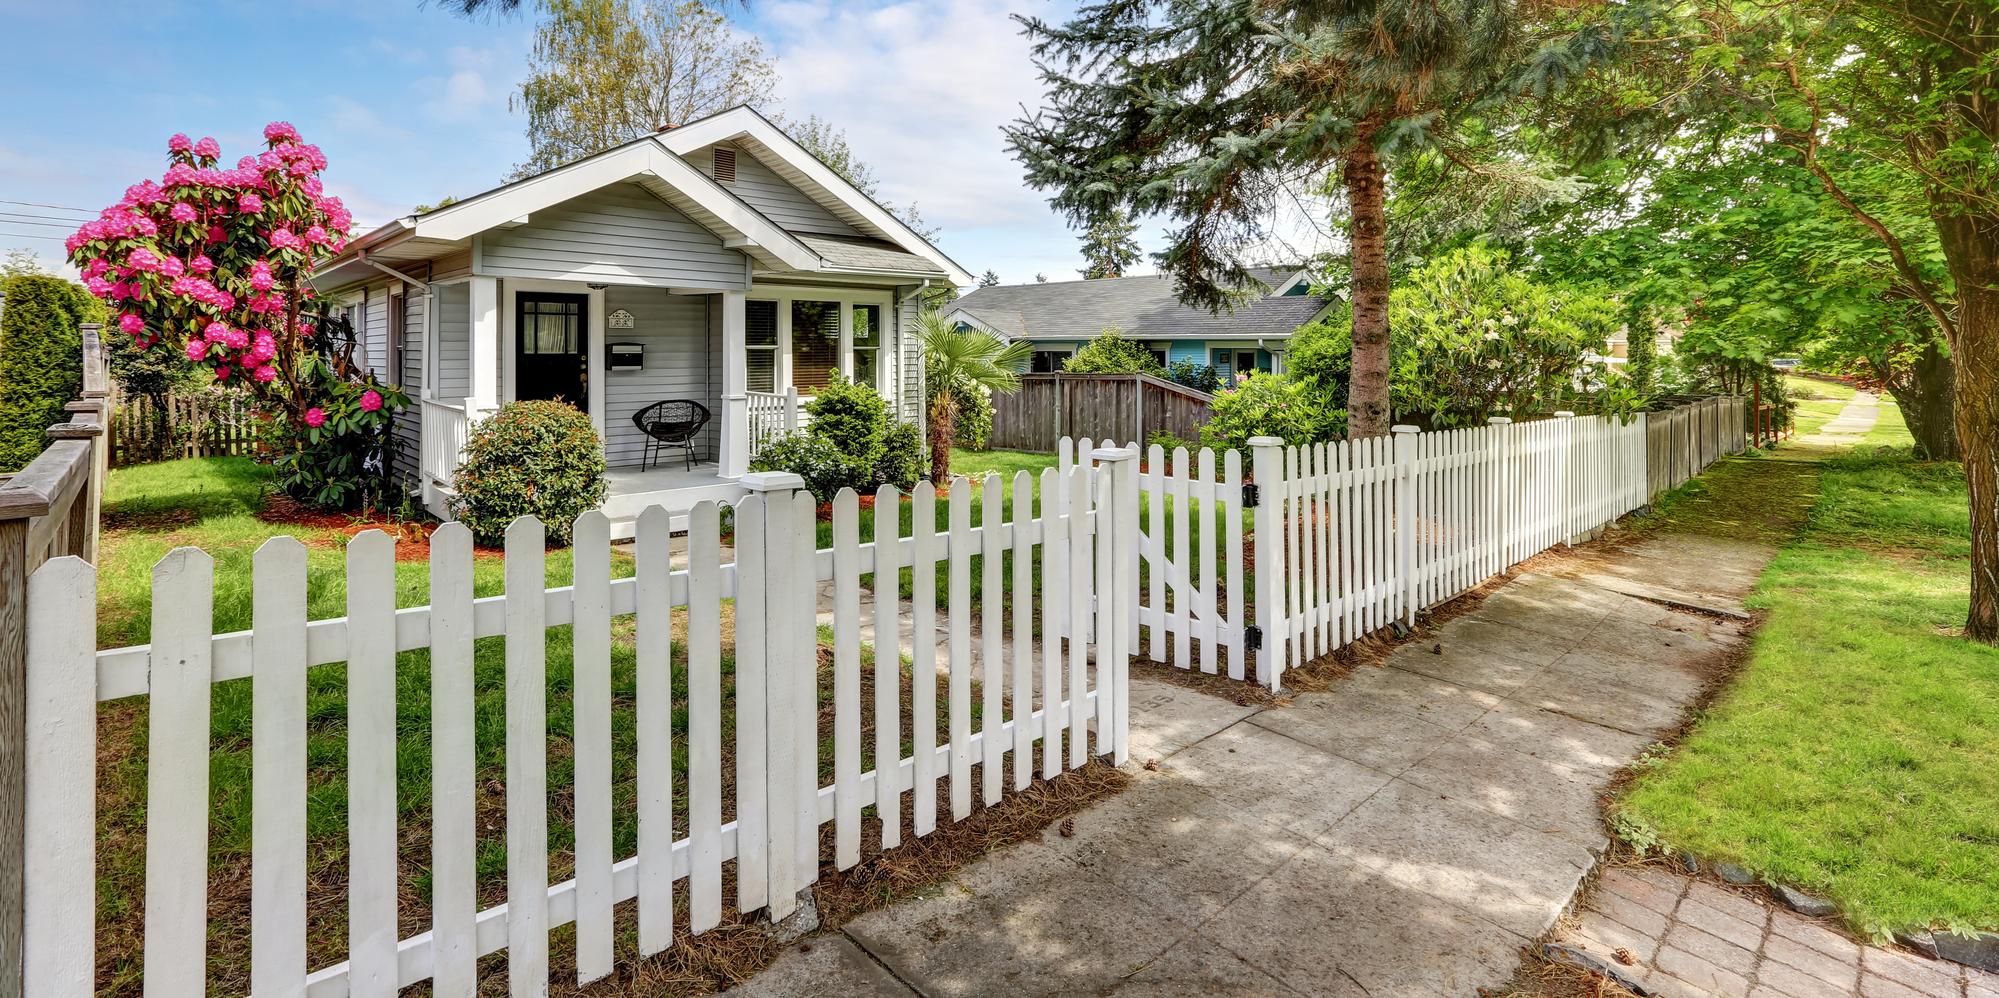 Understanding The Rich History of The White Picket Fence - All American ...